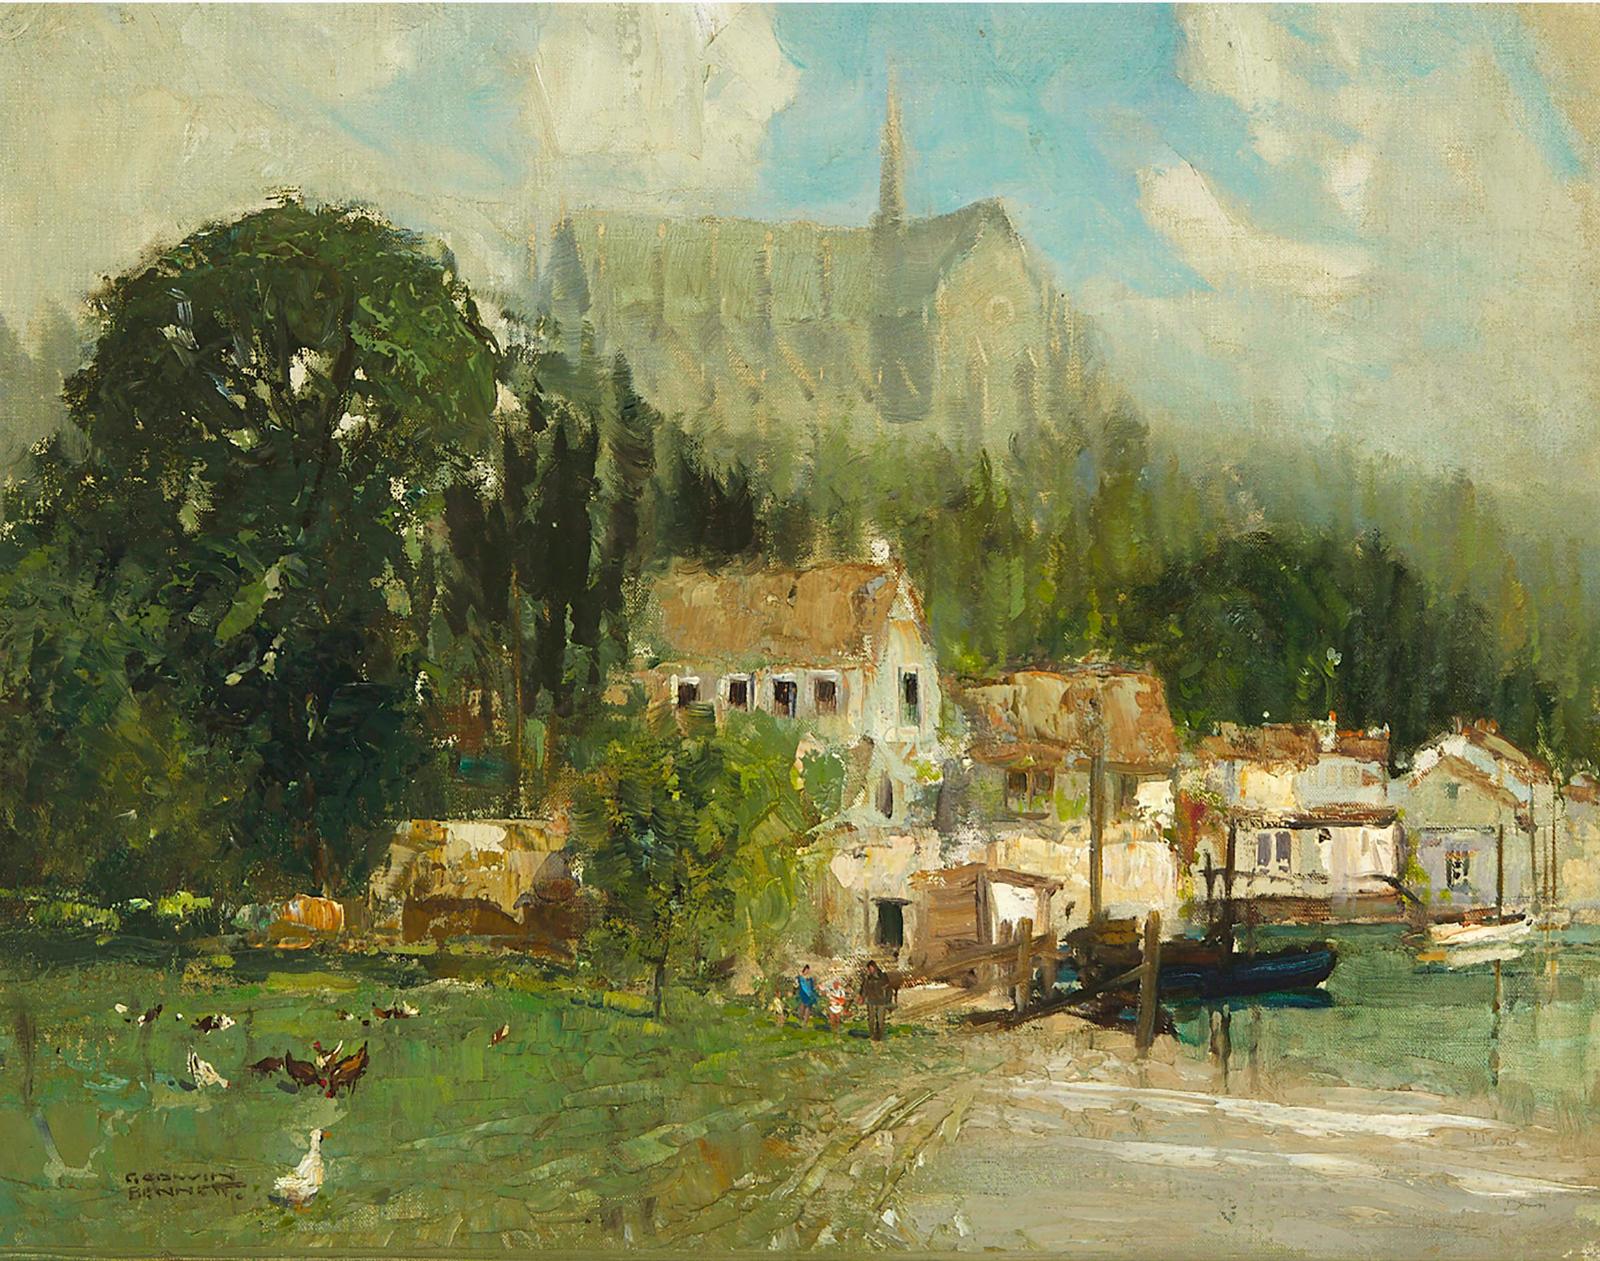 Godwin Bennett (1888-1950) - Houses On The Banks Of A Cathedral